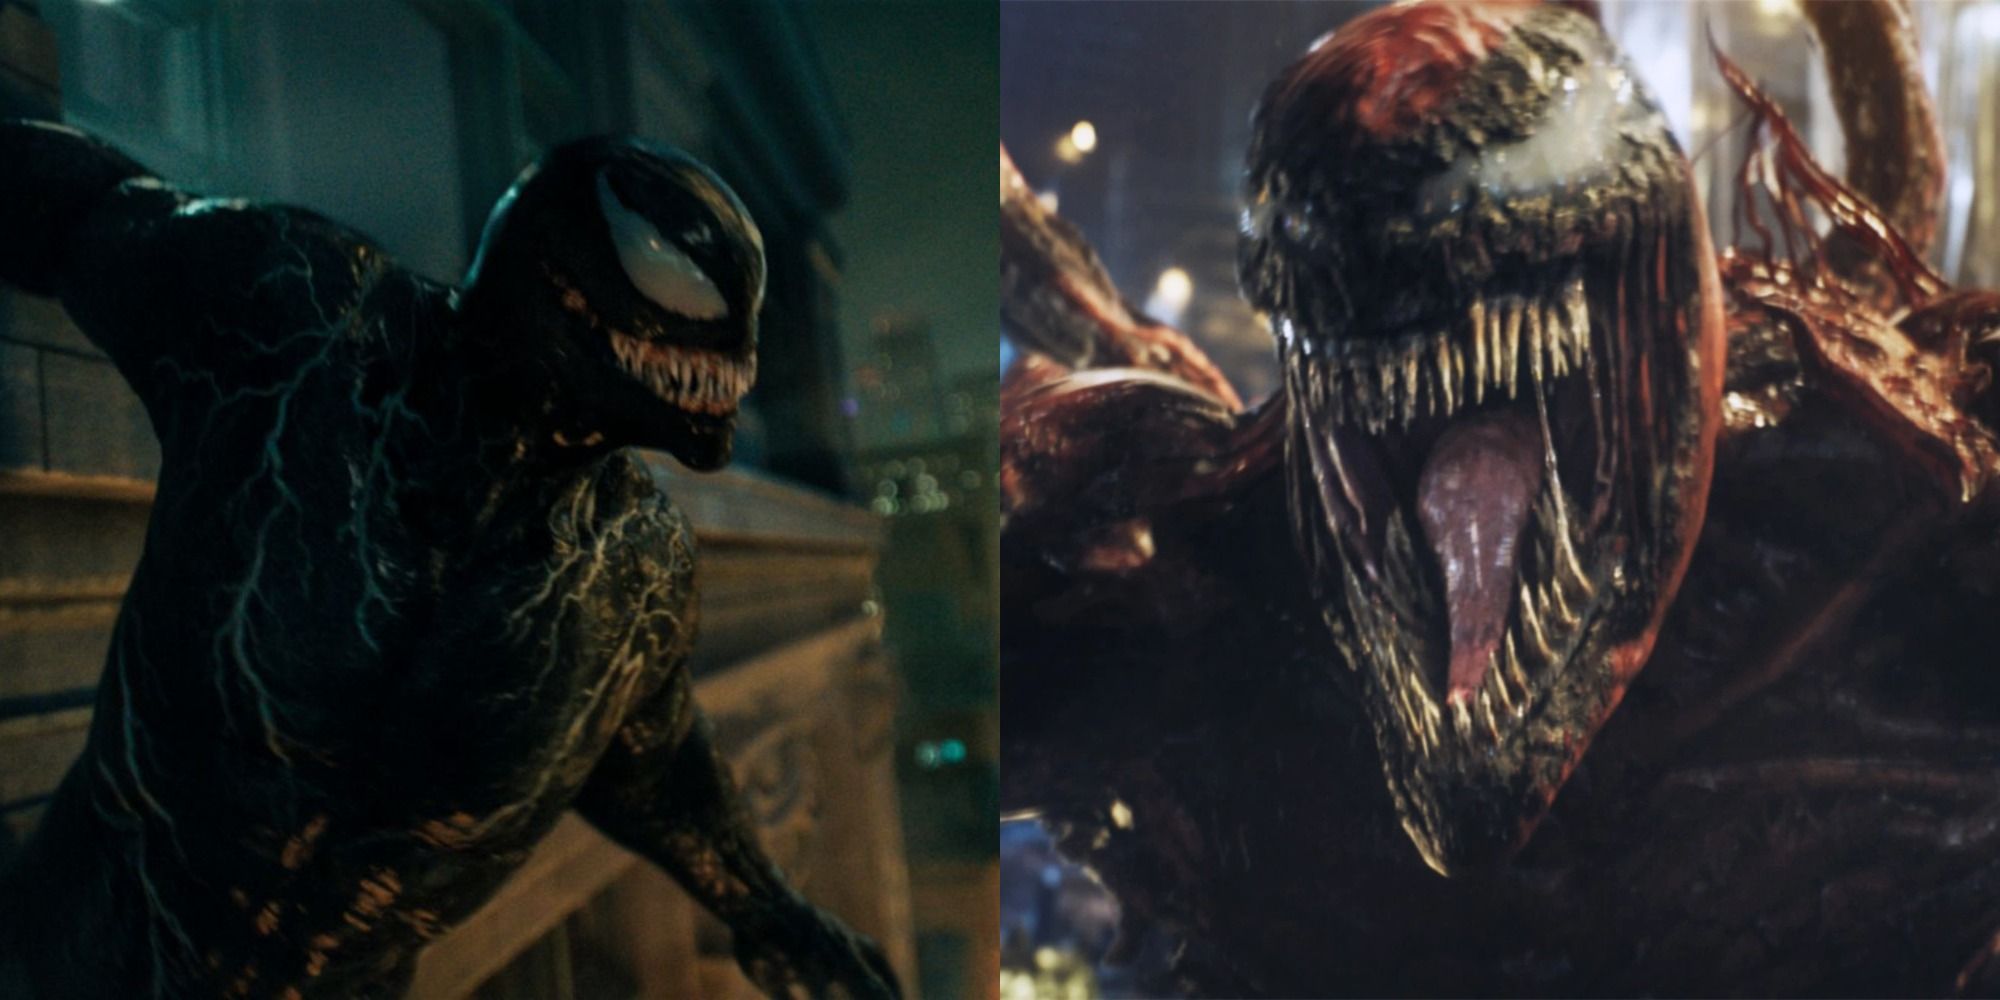 Venom Let There Be Carnage Which Character Are You Based On Your Zodiac Sign